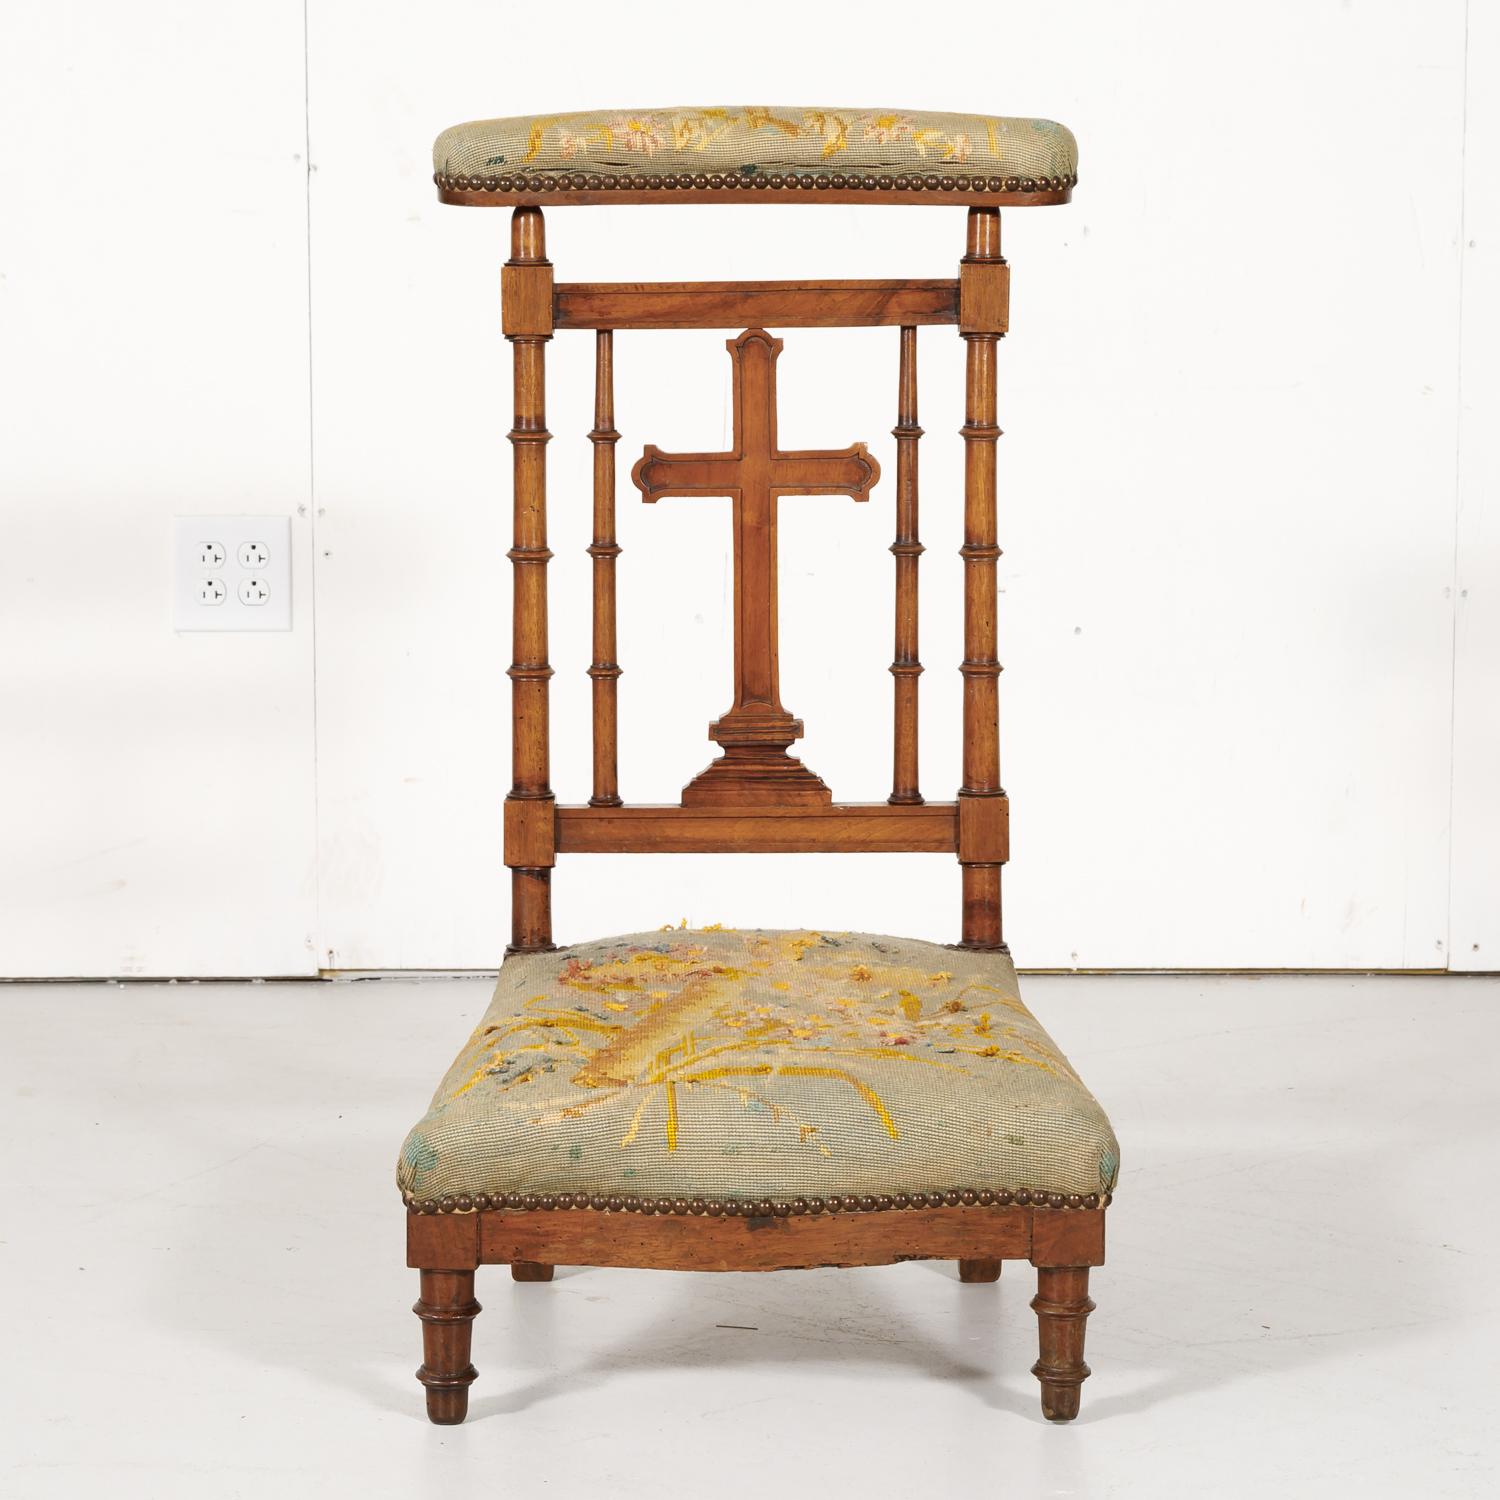 19th century French Napoleon III period prie dieu or prayer chair handcrafted and carved of solid walnut in Lyon, circa 1880s. This beautiful kneeling chair has its original covered, sloped top to rest one's arms or a prayer book with a hand carved